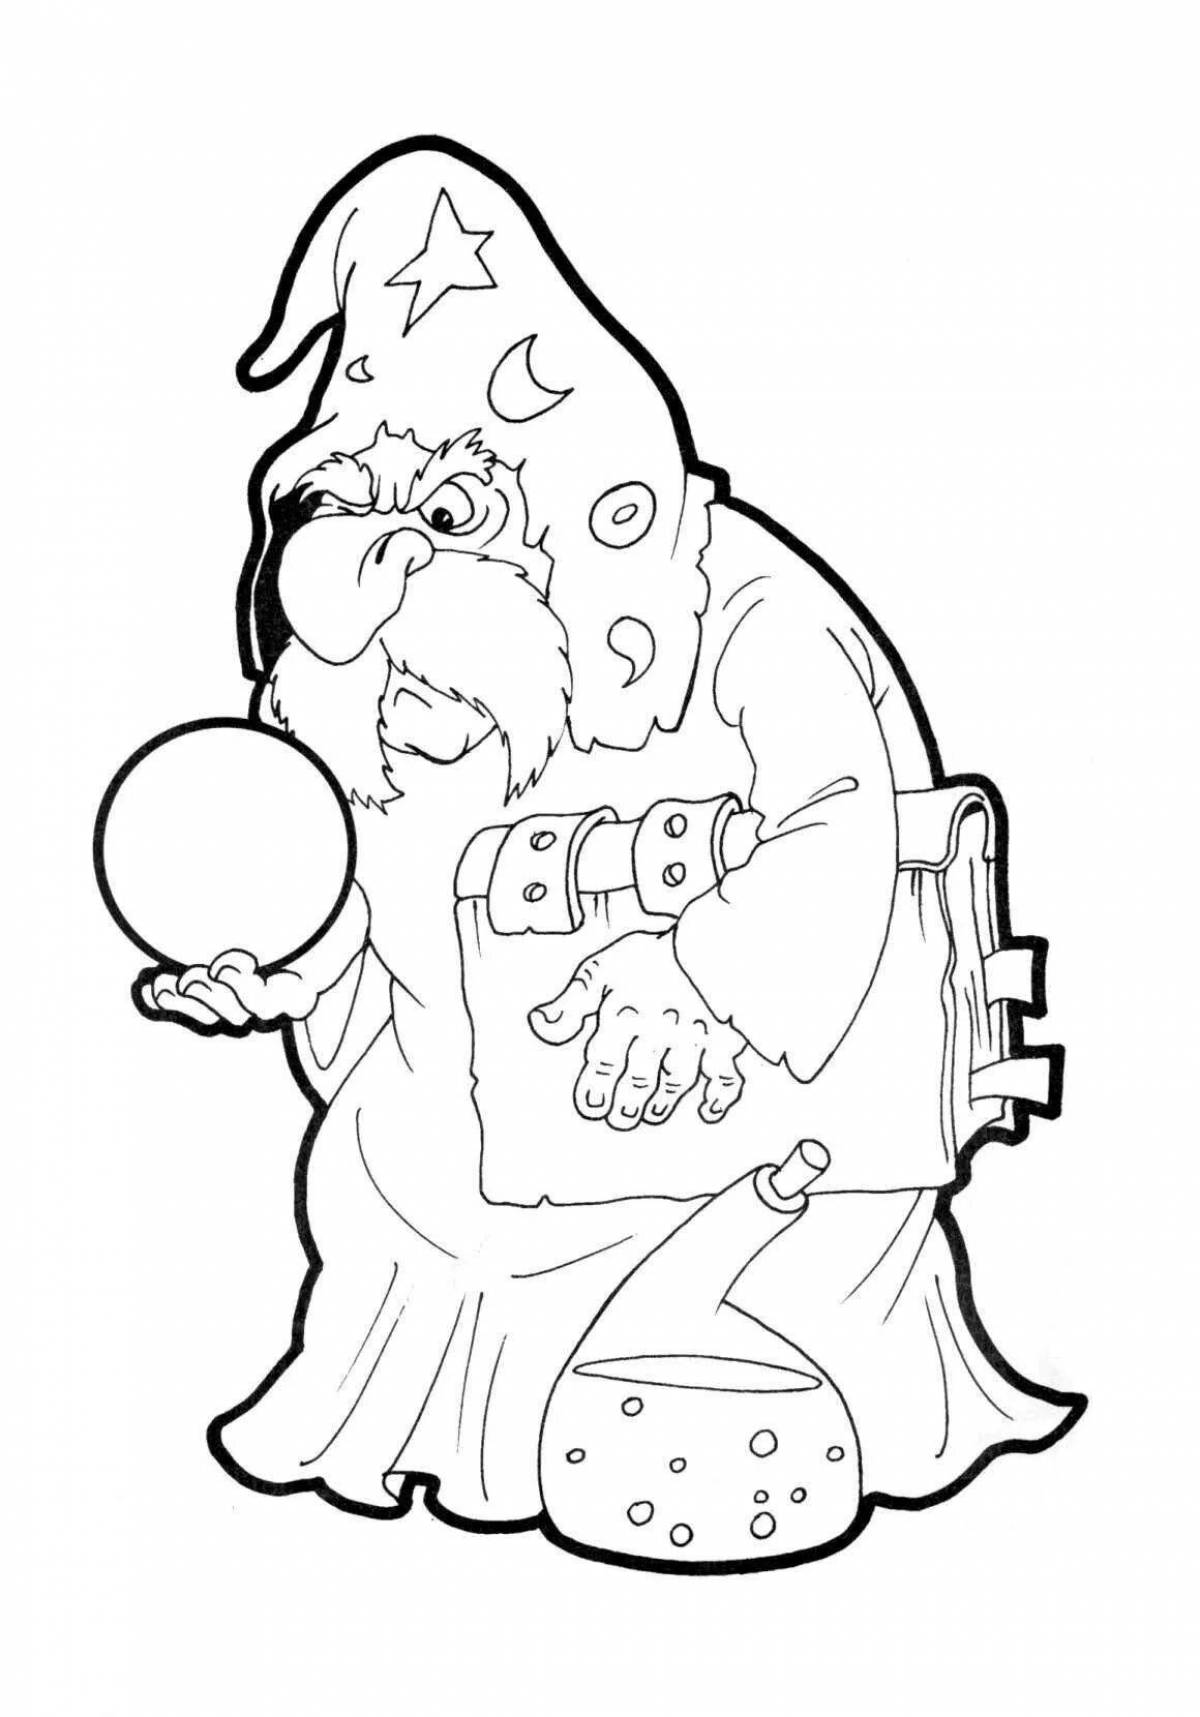 Animated goblins coloring page for preschoolers